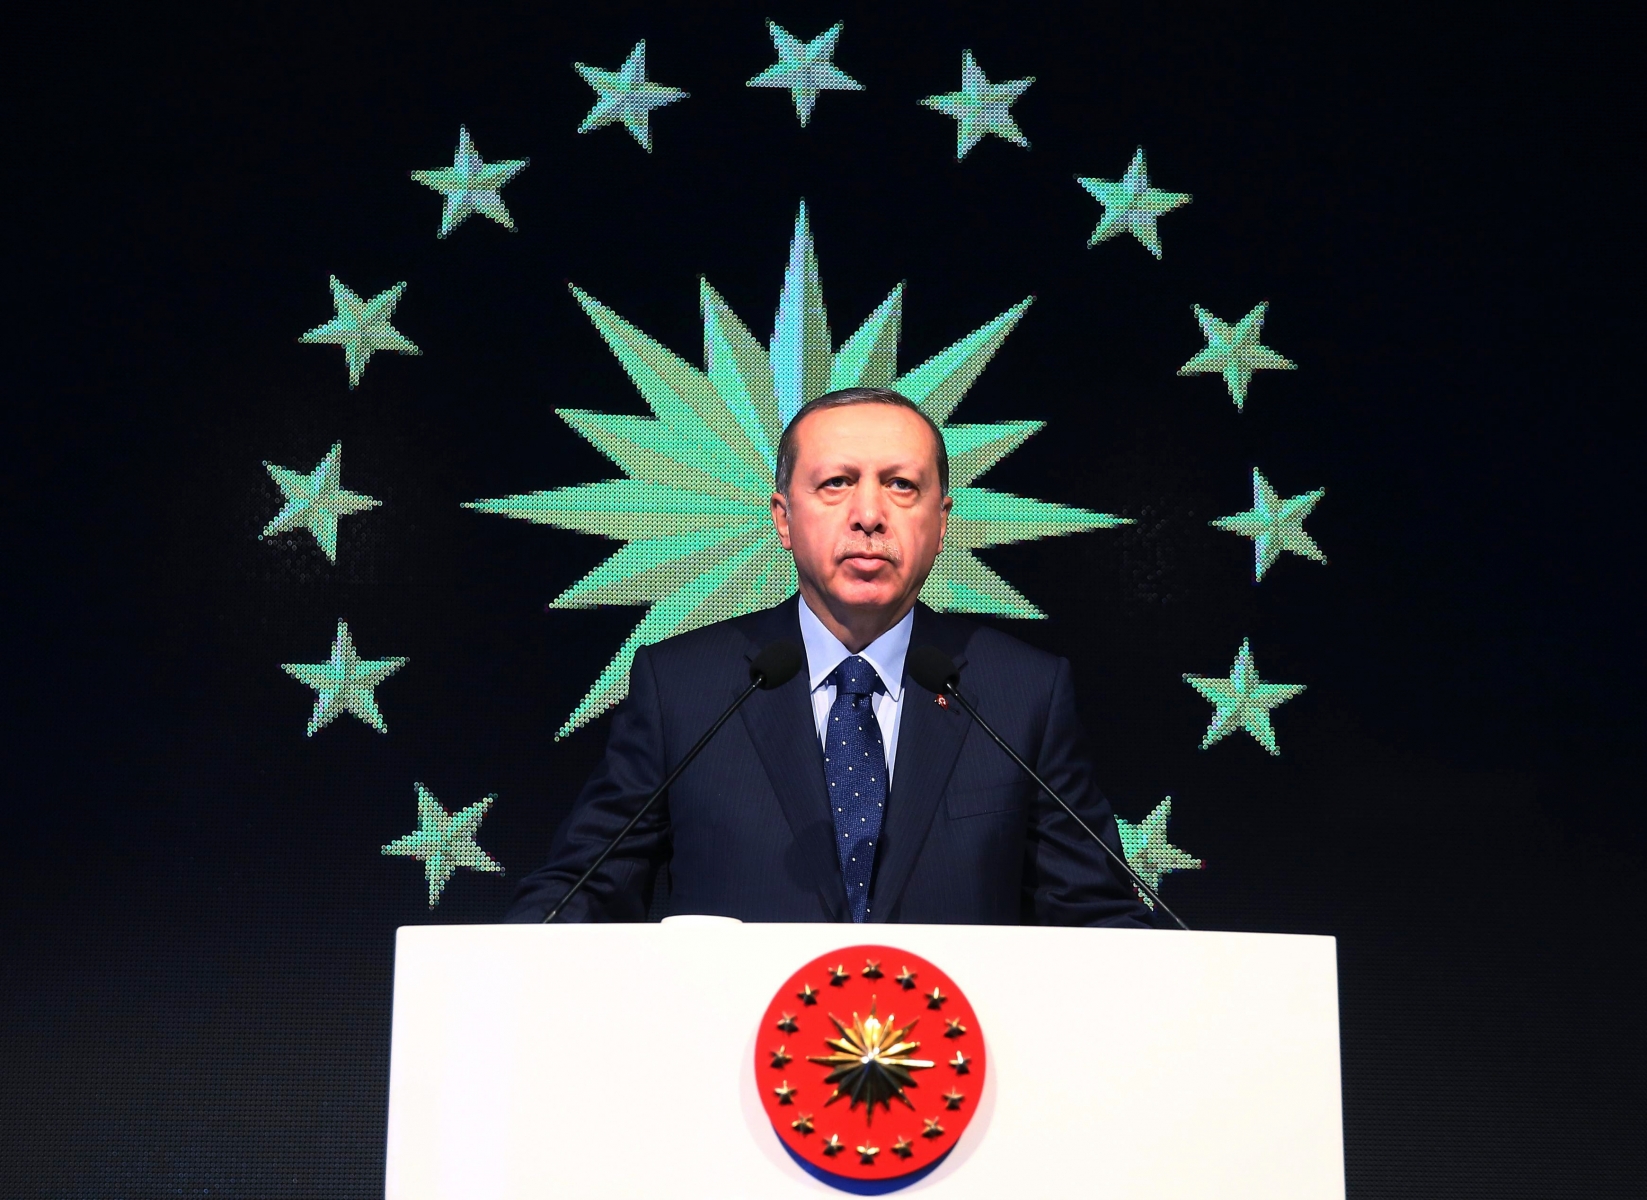 Turkey's President Recep Tayyip Erdogan delivers a speech during the opening of a new building for Istanbul's stock exchange, Saturday, Jan. 14, 2017. (Kayhan Ozer/Presidential Press Service, Pool Photo via AP) Turkey Economy